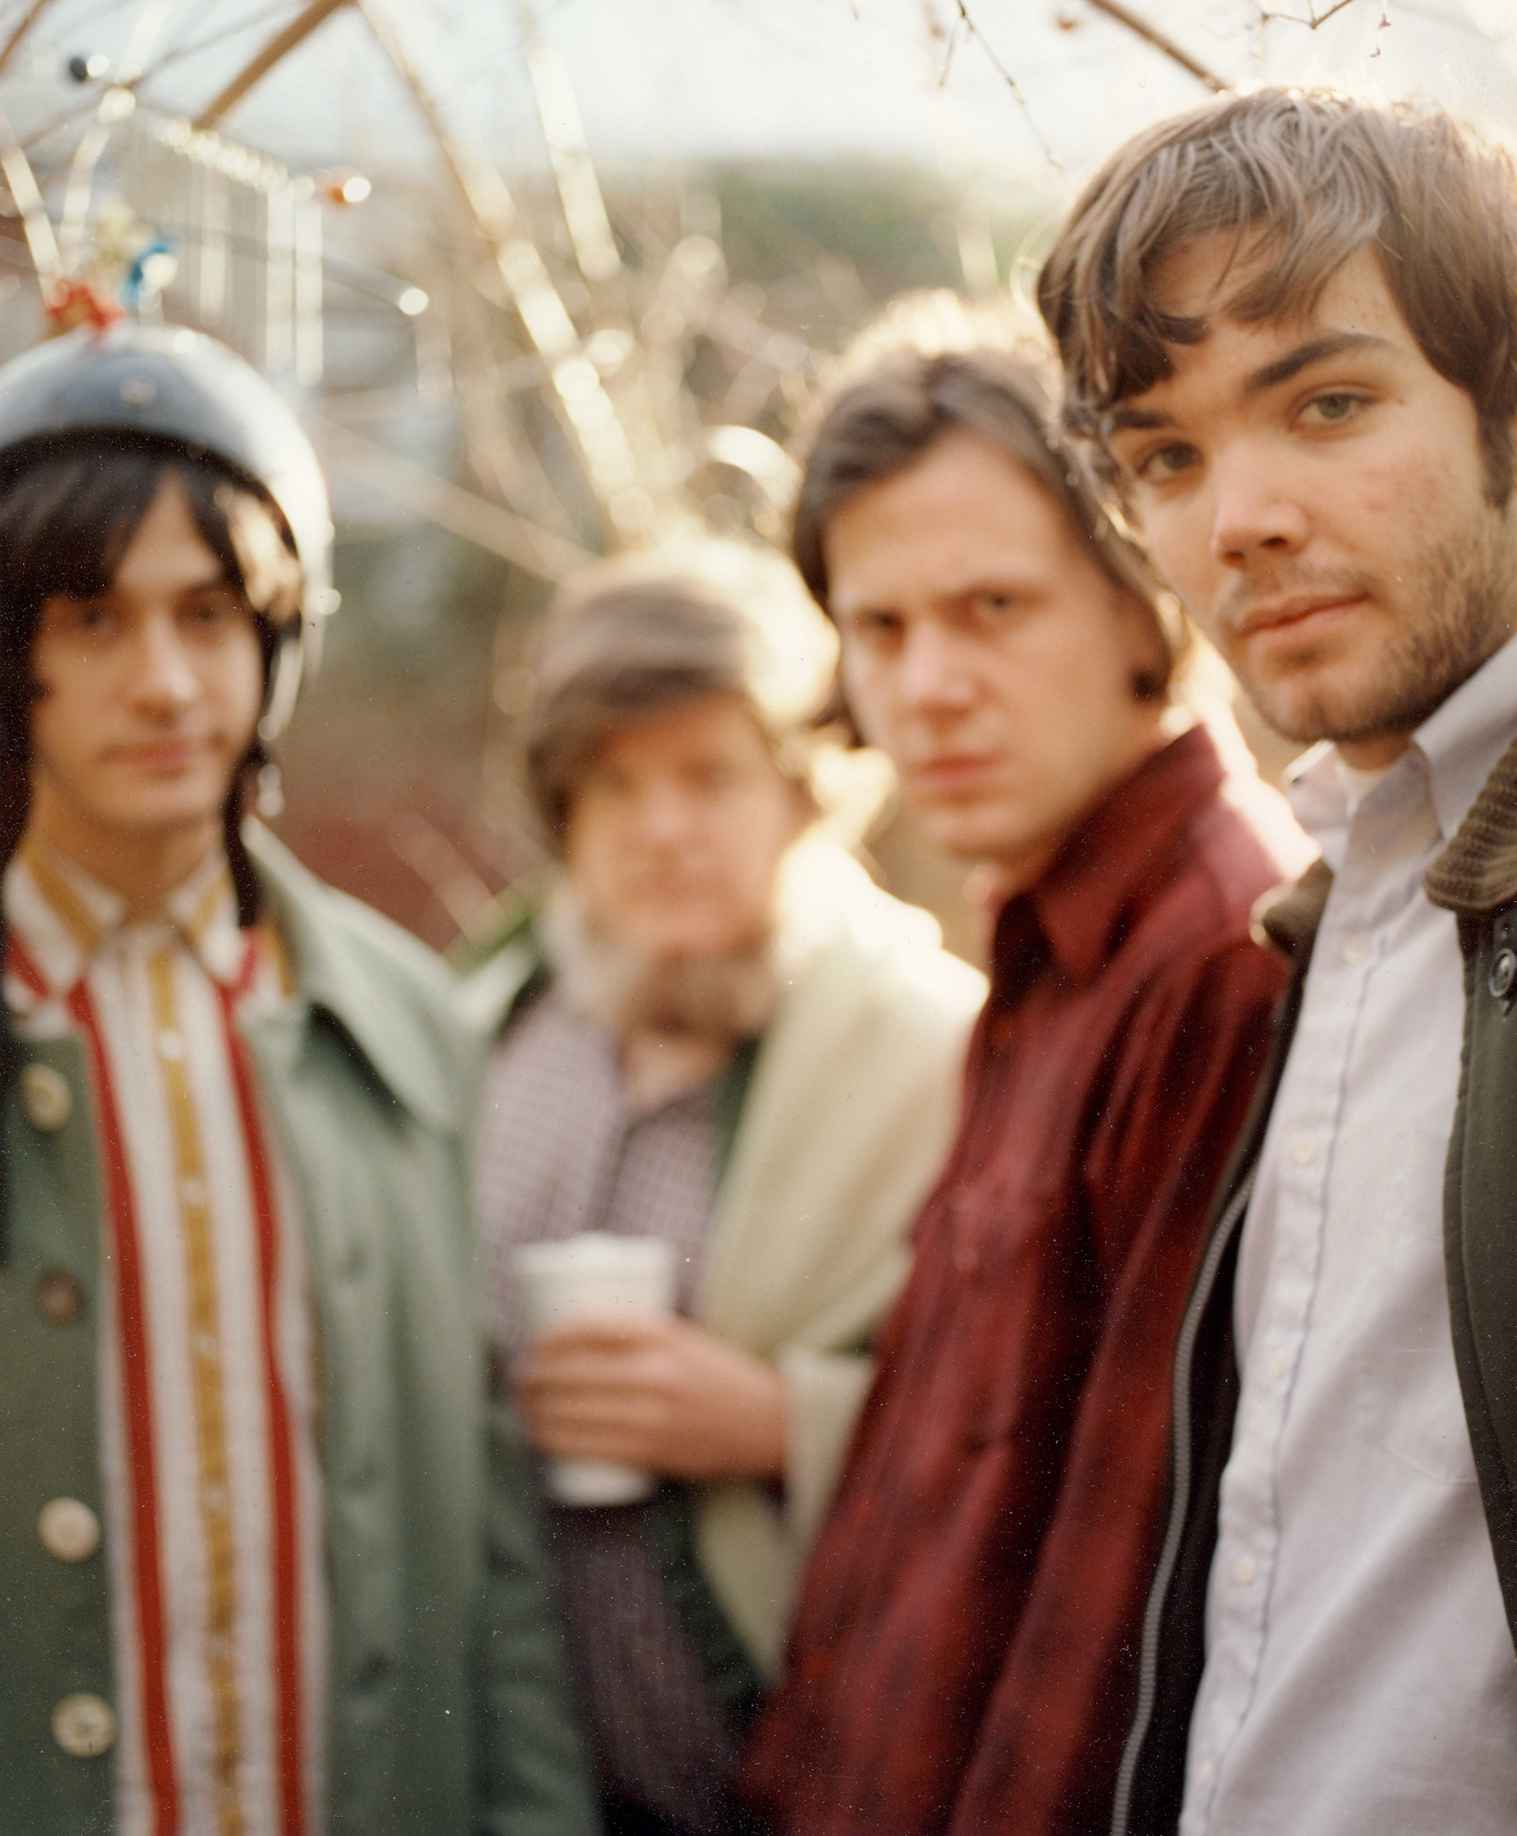 Neutral Milk Hotel Will Live Forever